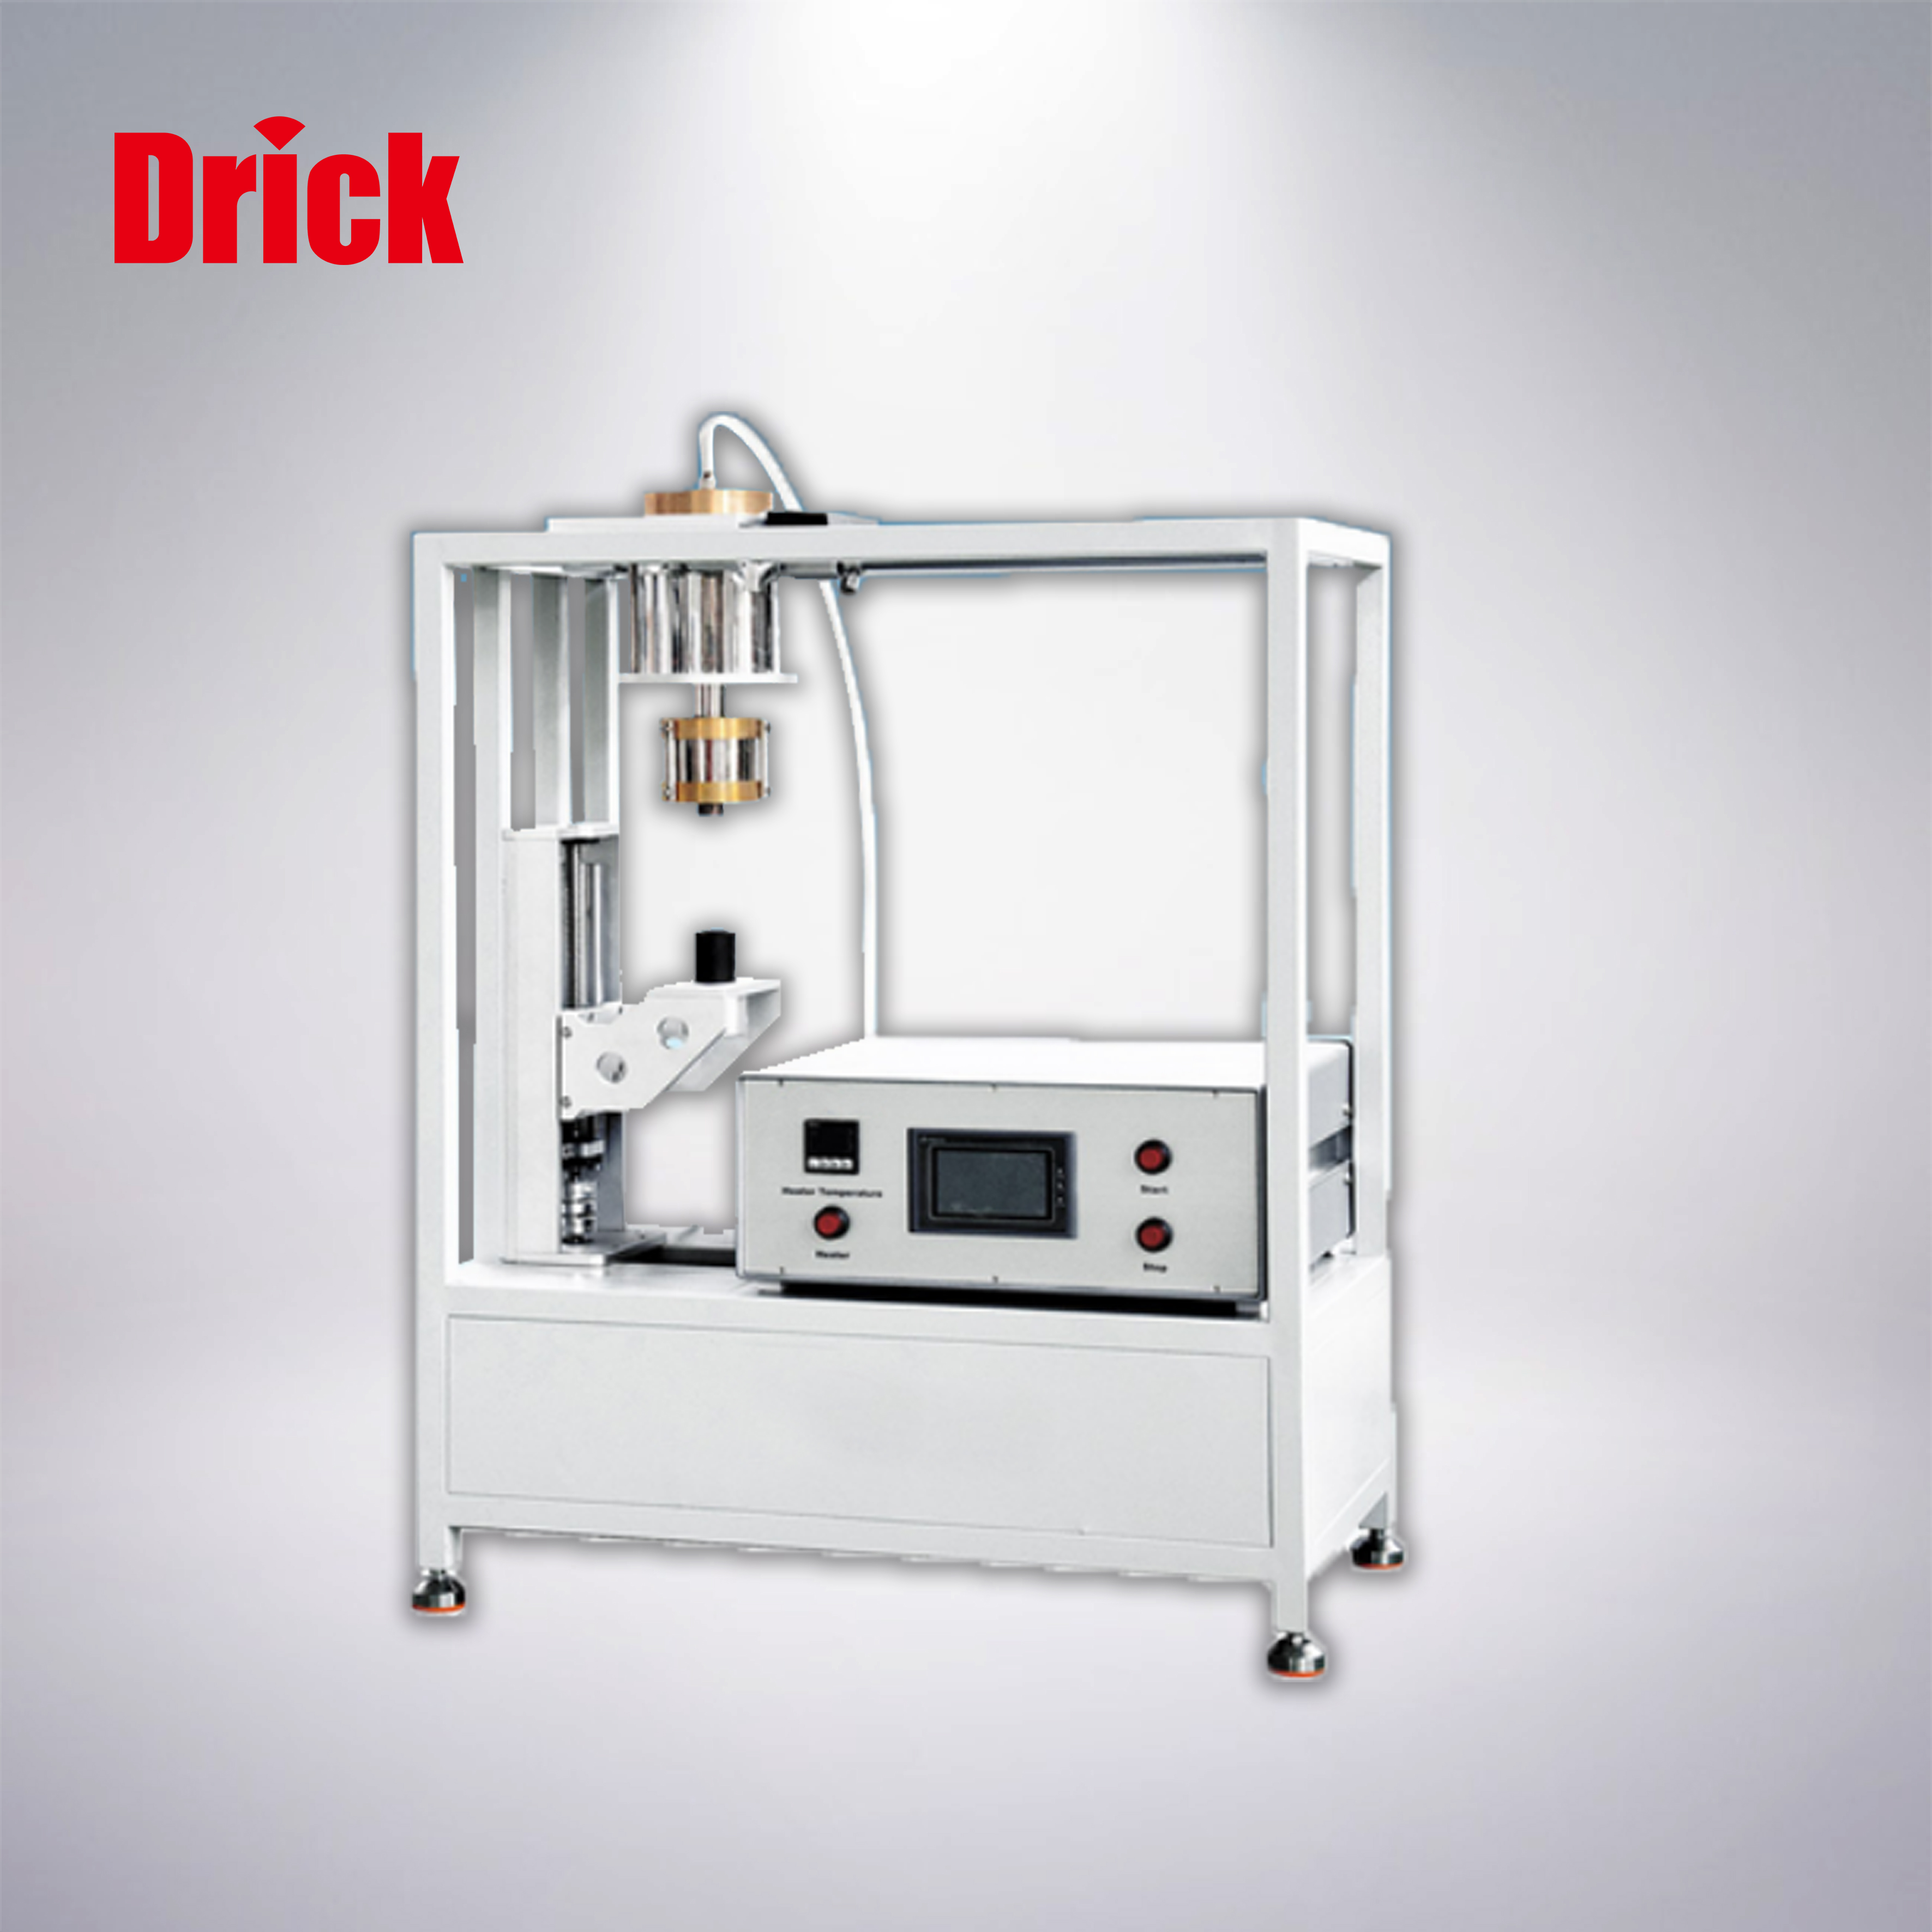 DRK-07D Contact heat resistance test device Featured Image